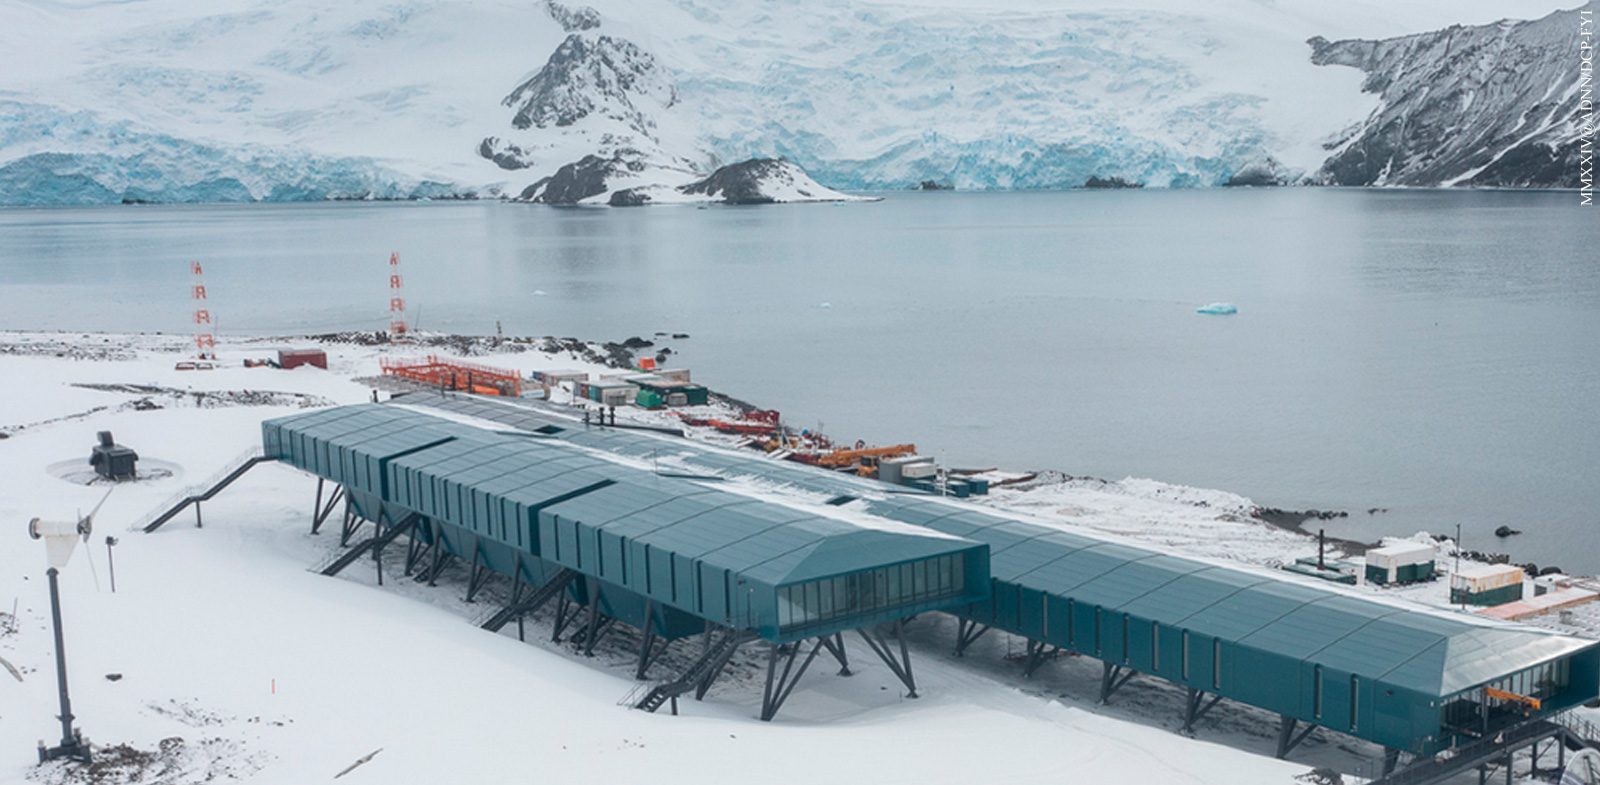 Brazil at the scientific forefront: 40 years of the Comandante Ferraz Antarctic Station